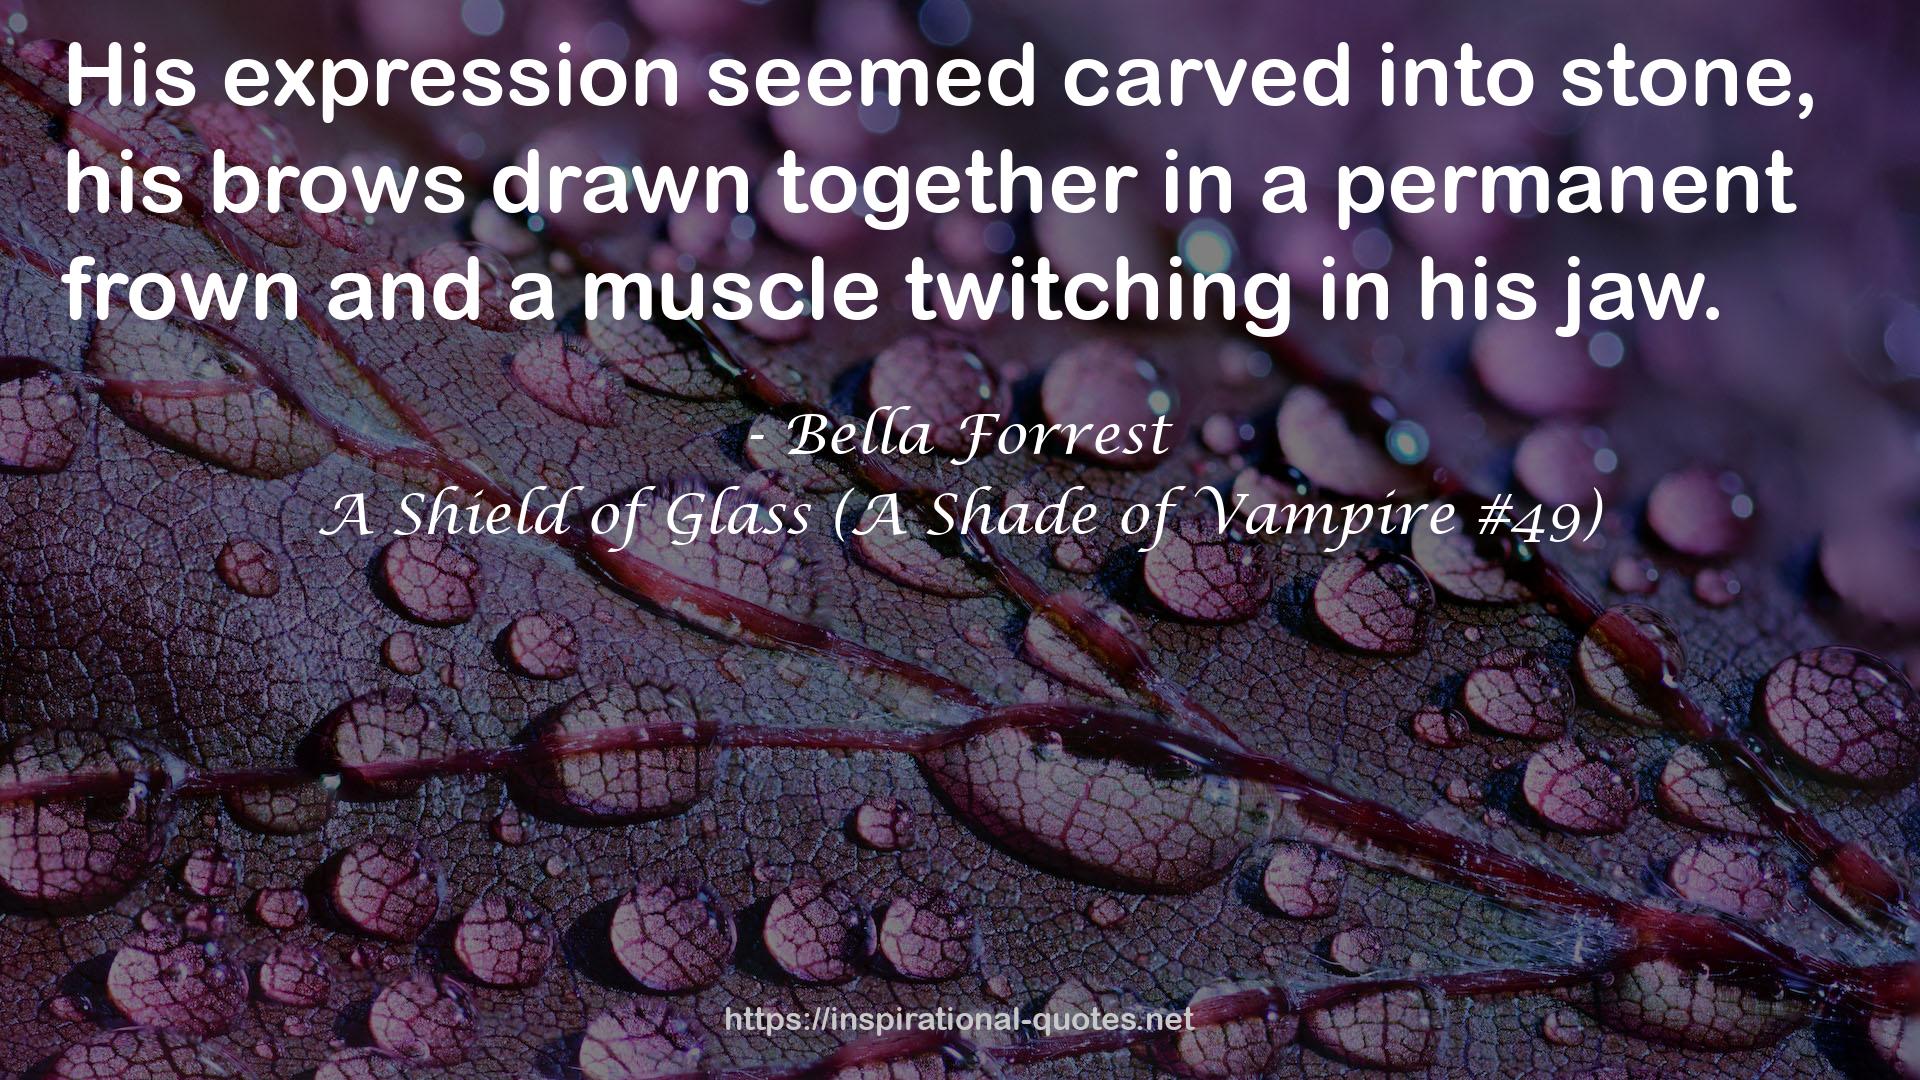 A Shield of Glass (A Shade of Vampire #49) QUOTES